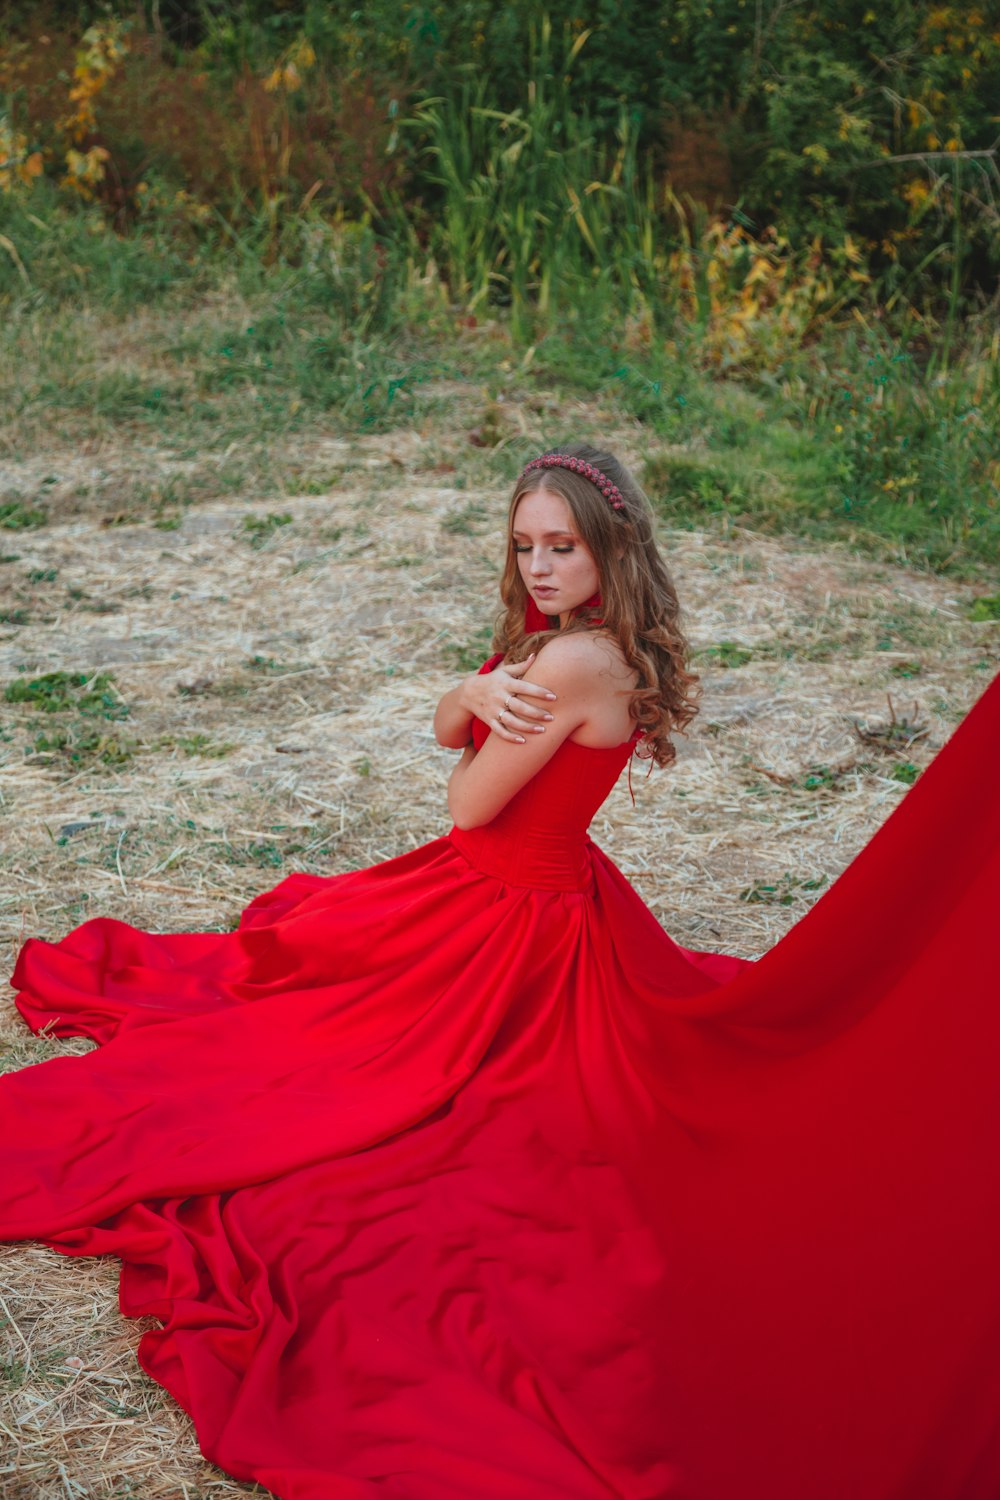 woman in red tube dress sitting on ground